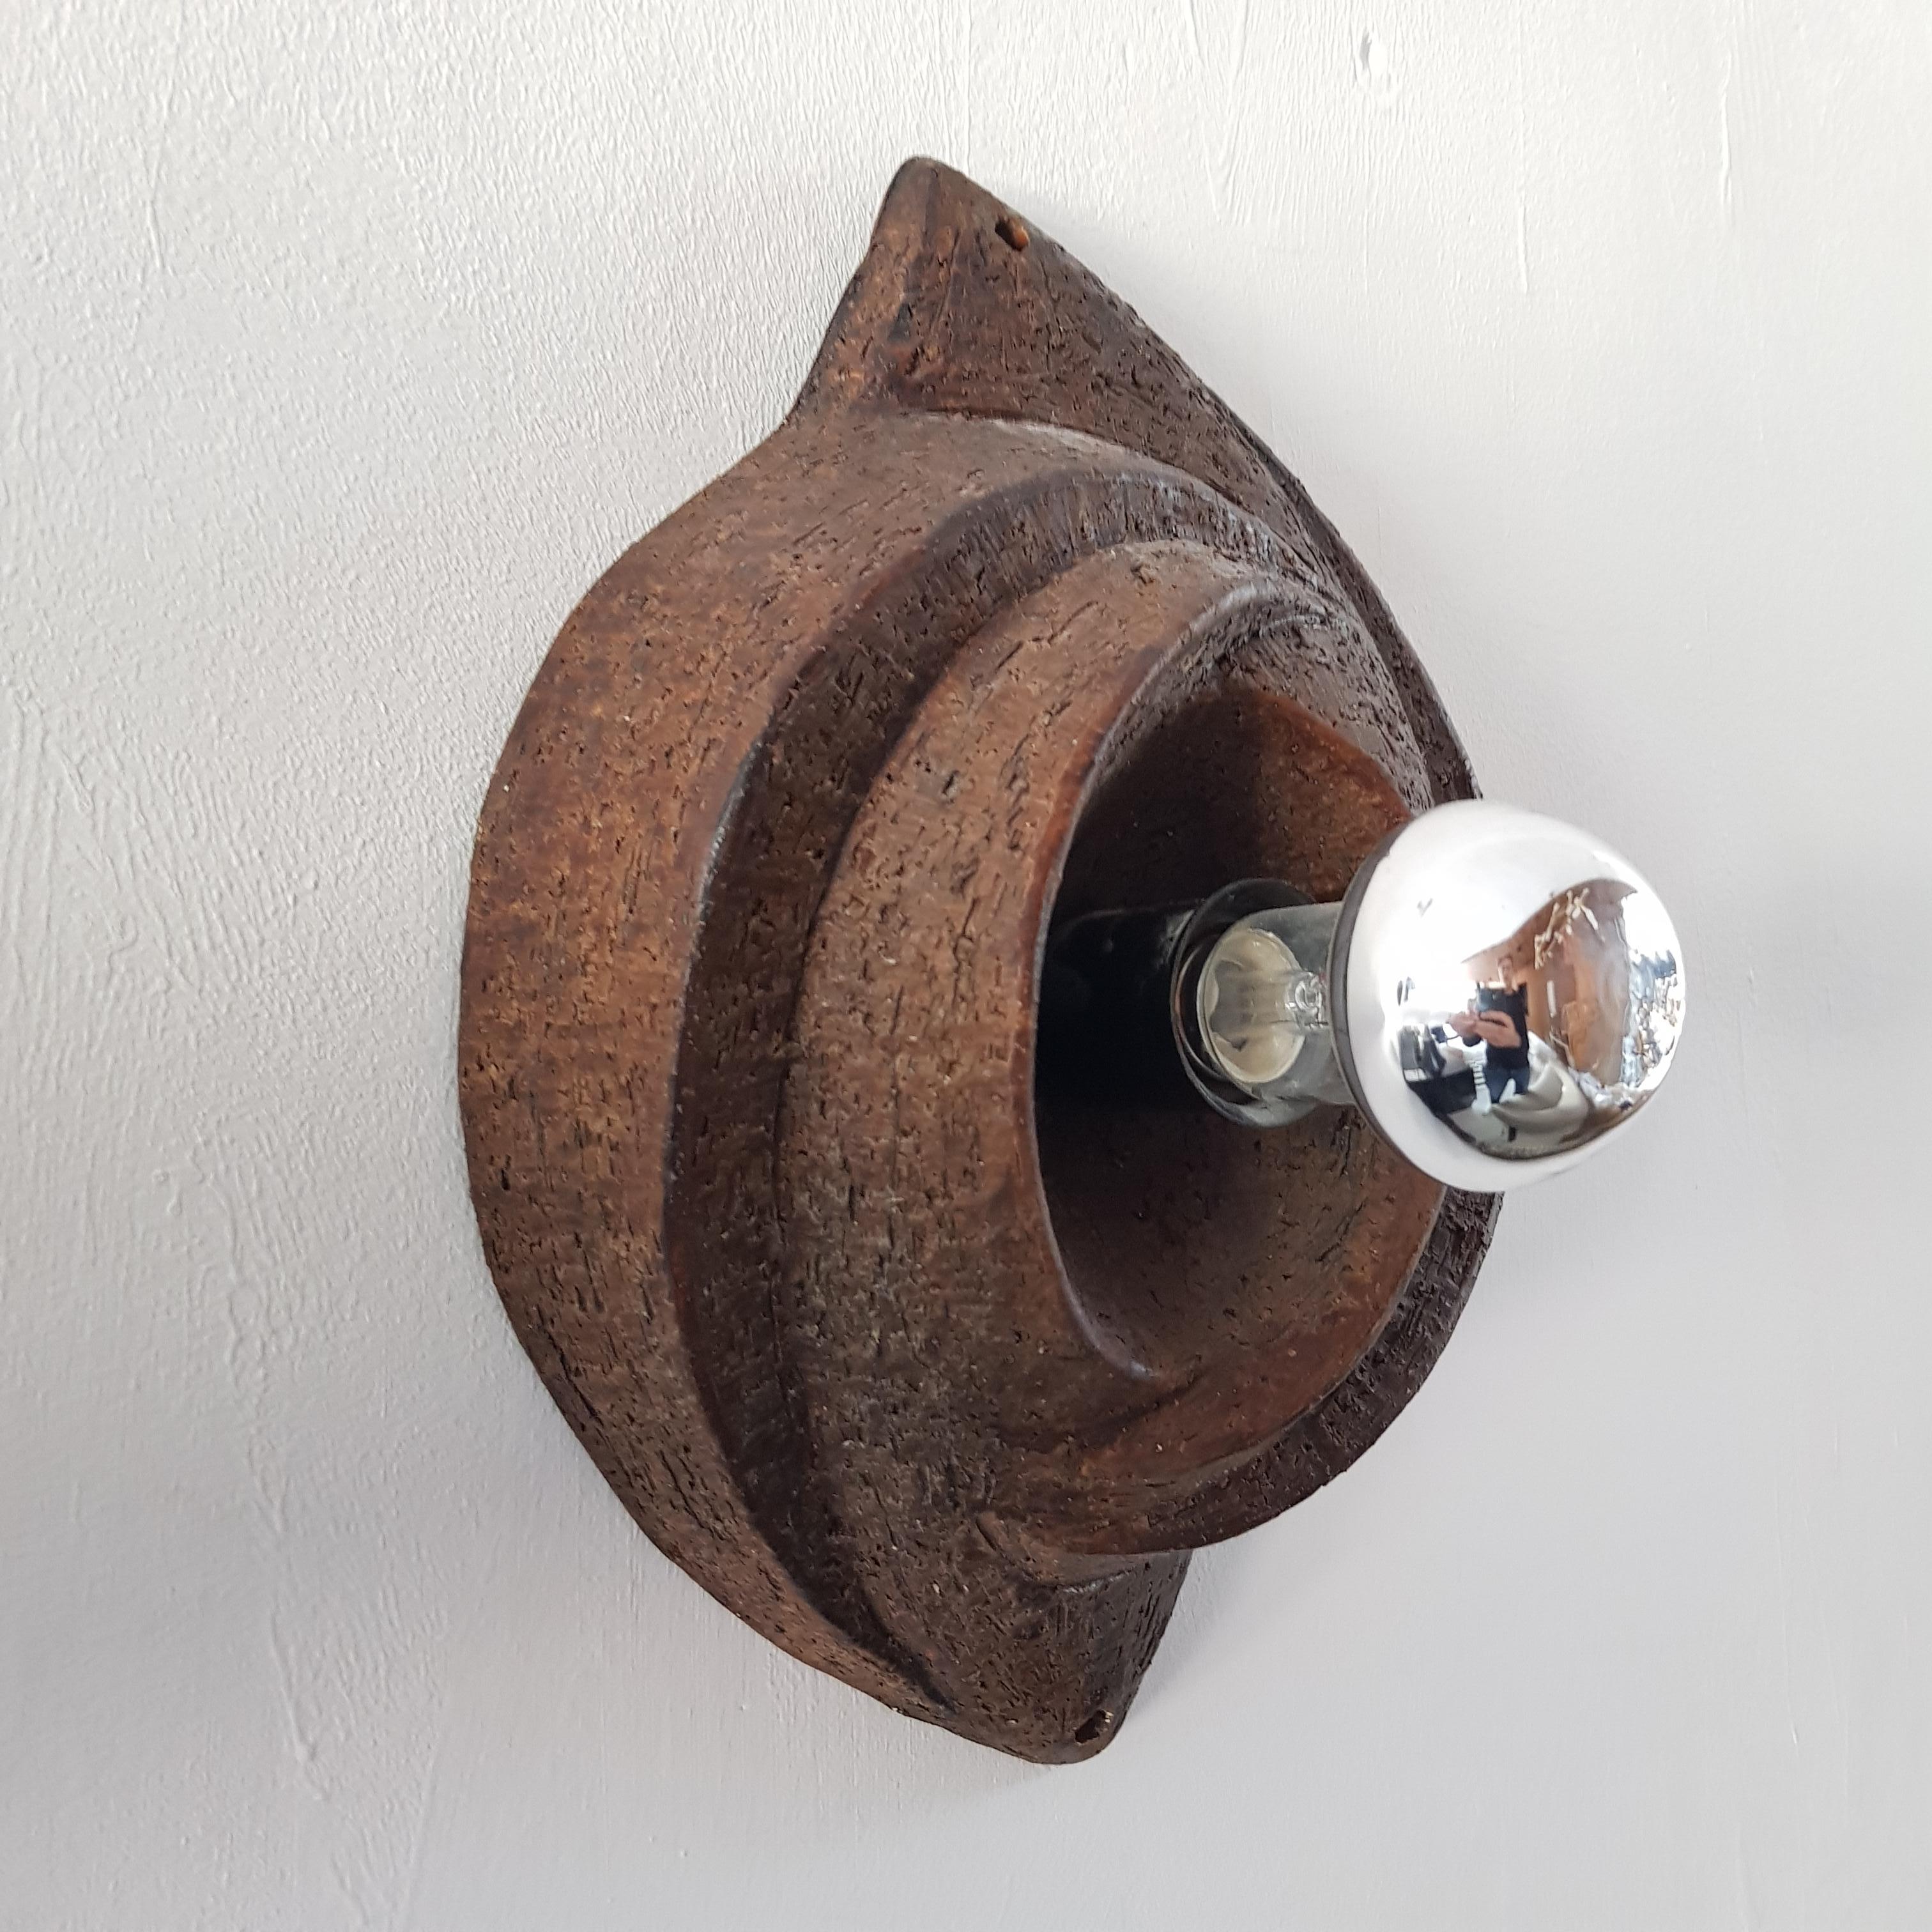 Robust vintage ceramic wall lamp from seventies. A real eye-catcher in a brutalist interior. The lamp is designed in a raw organic shape and is made in hand moulded earthenware/ceramics. The lamp comes complete with a ball lamps with silver mirror